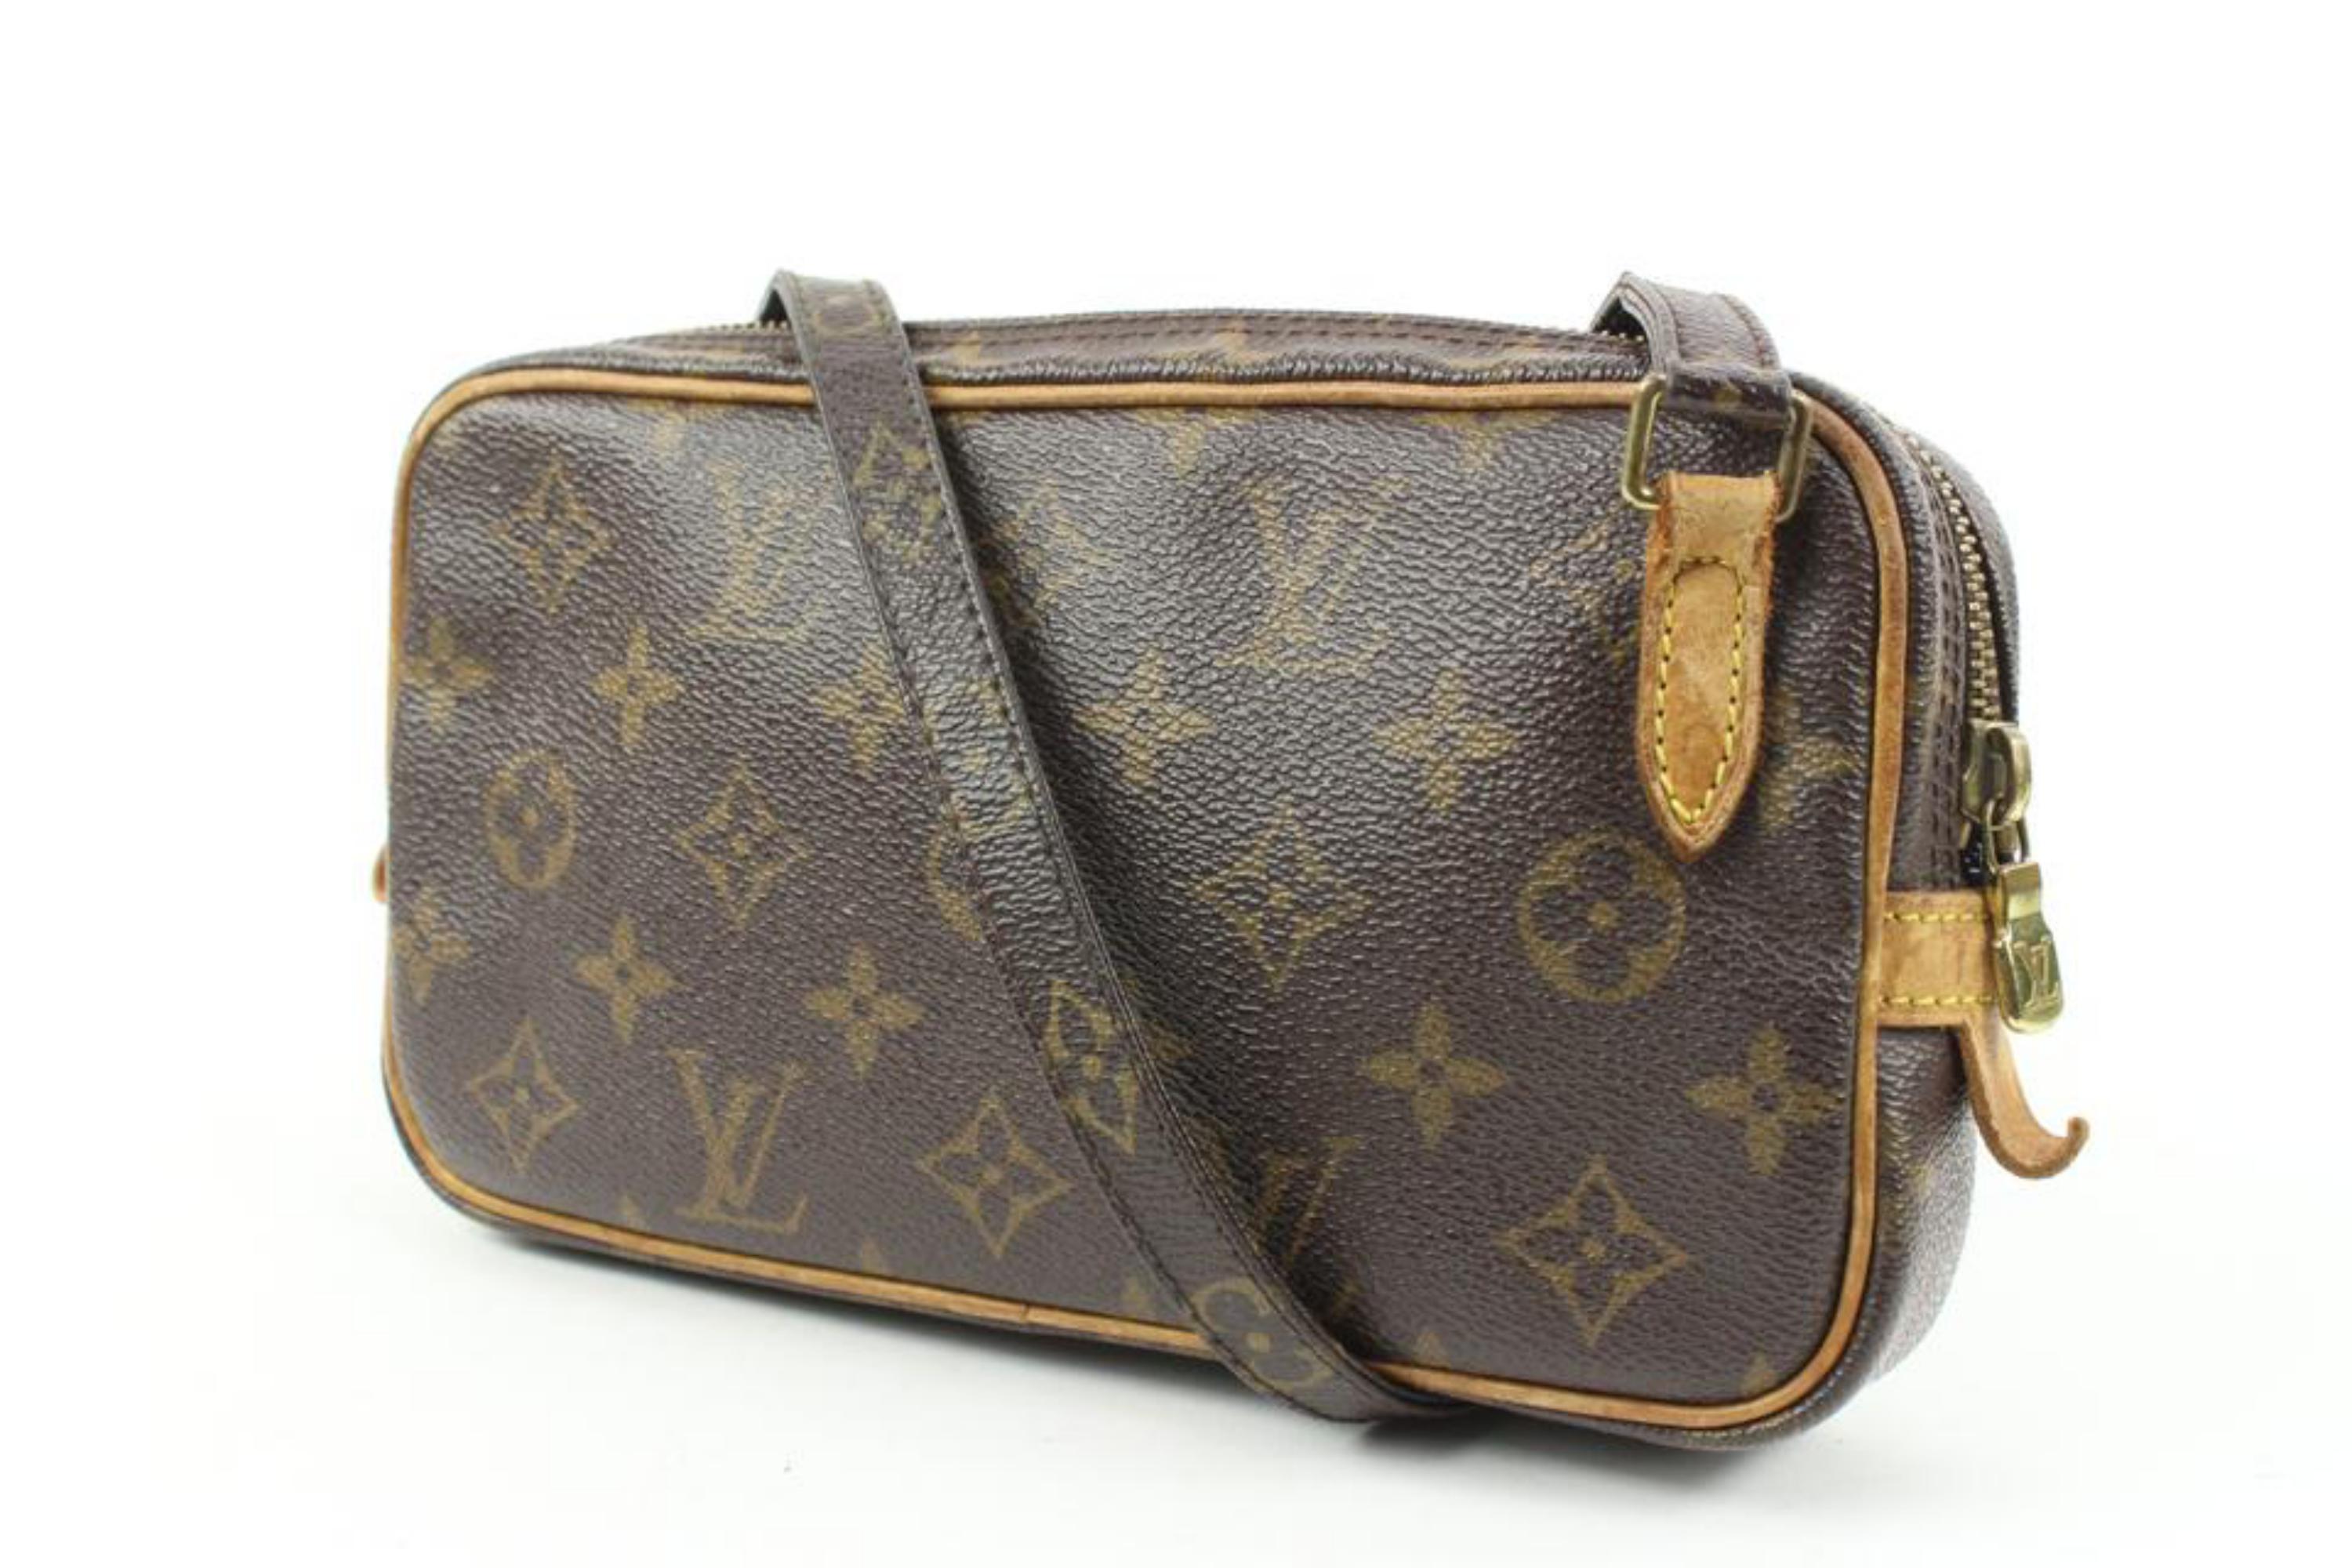 Louis Vuitton Monogram Pochette Marly Bandouliere Crossbody Bag 121lv58
Date Code/Serial Number: DU0092
Made In: France
Measurements: Length:  8.5